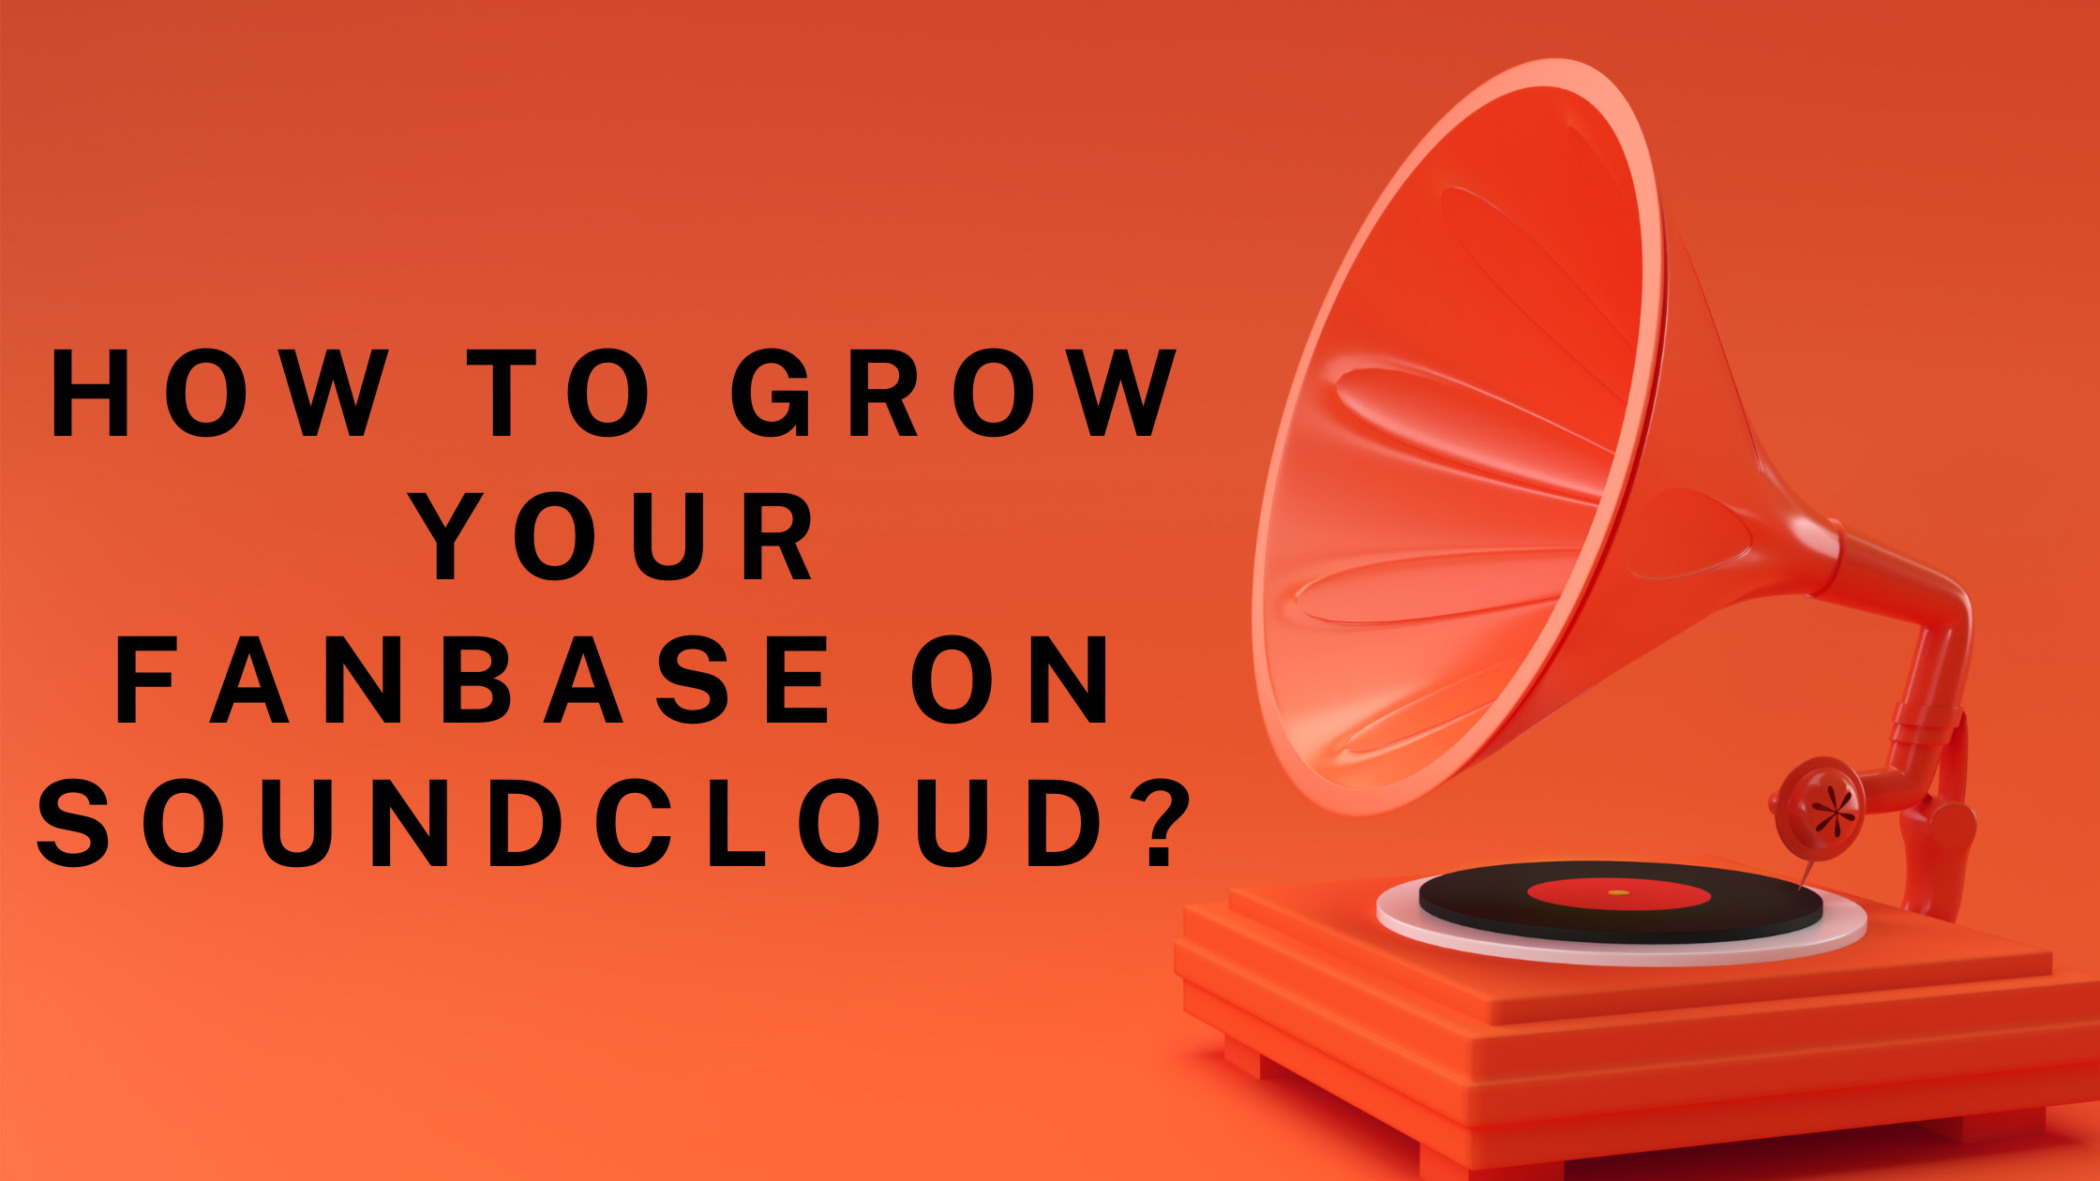 How to grow your fanbase on SoundCloud